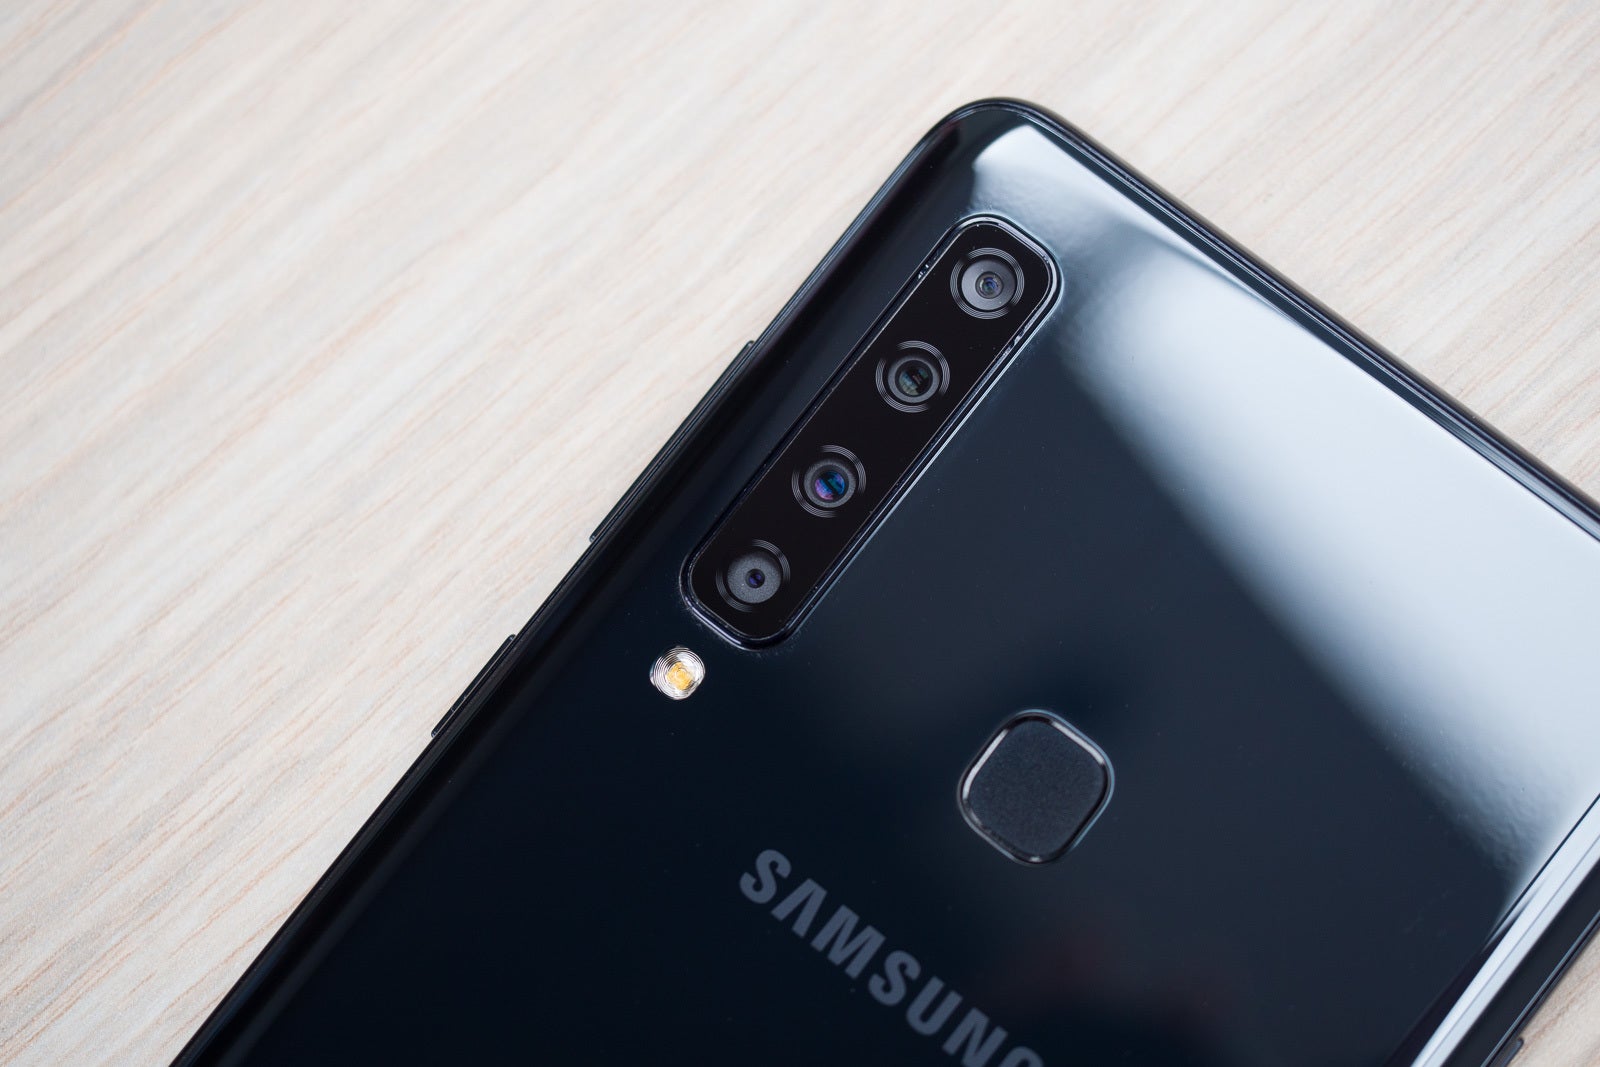 Samsung needs to focus on getting the fundamentals right, and sometimes that means one good camera is better than four with poor performance - Samsung is losing the mid-range battle